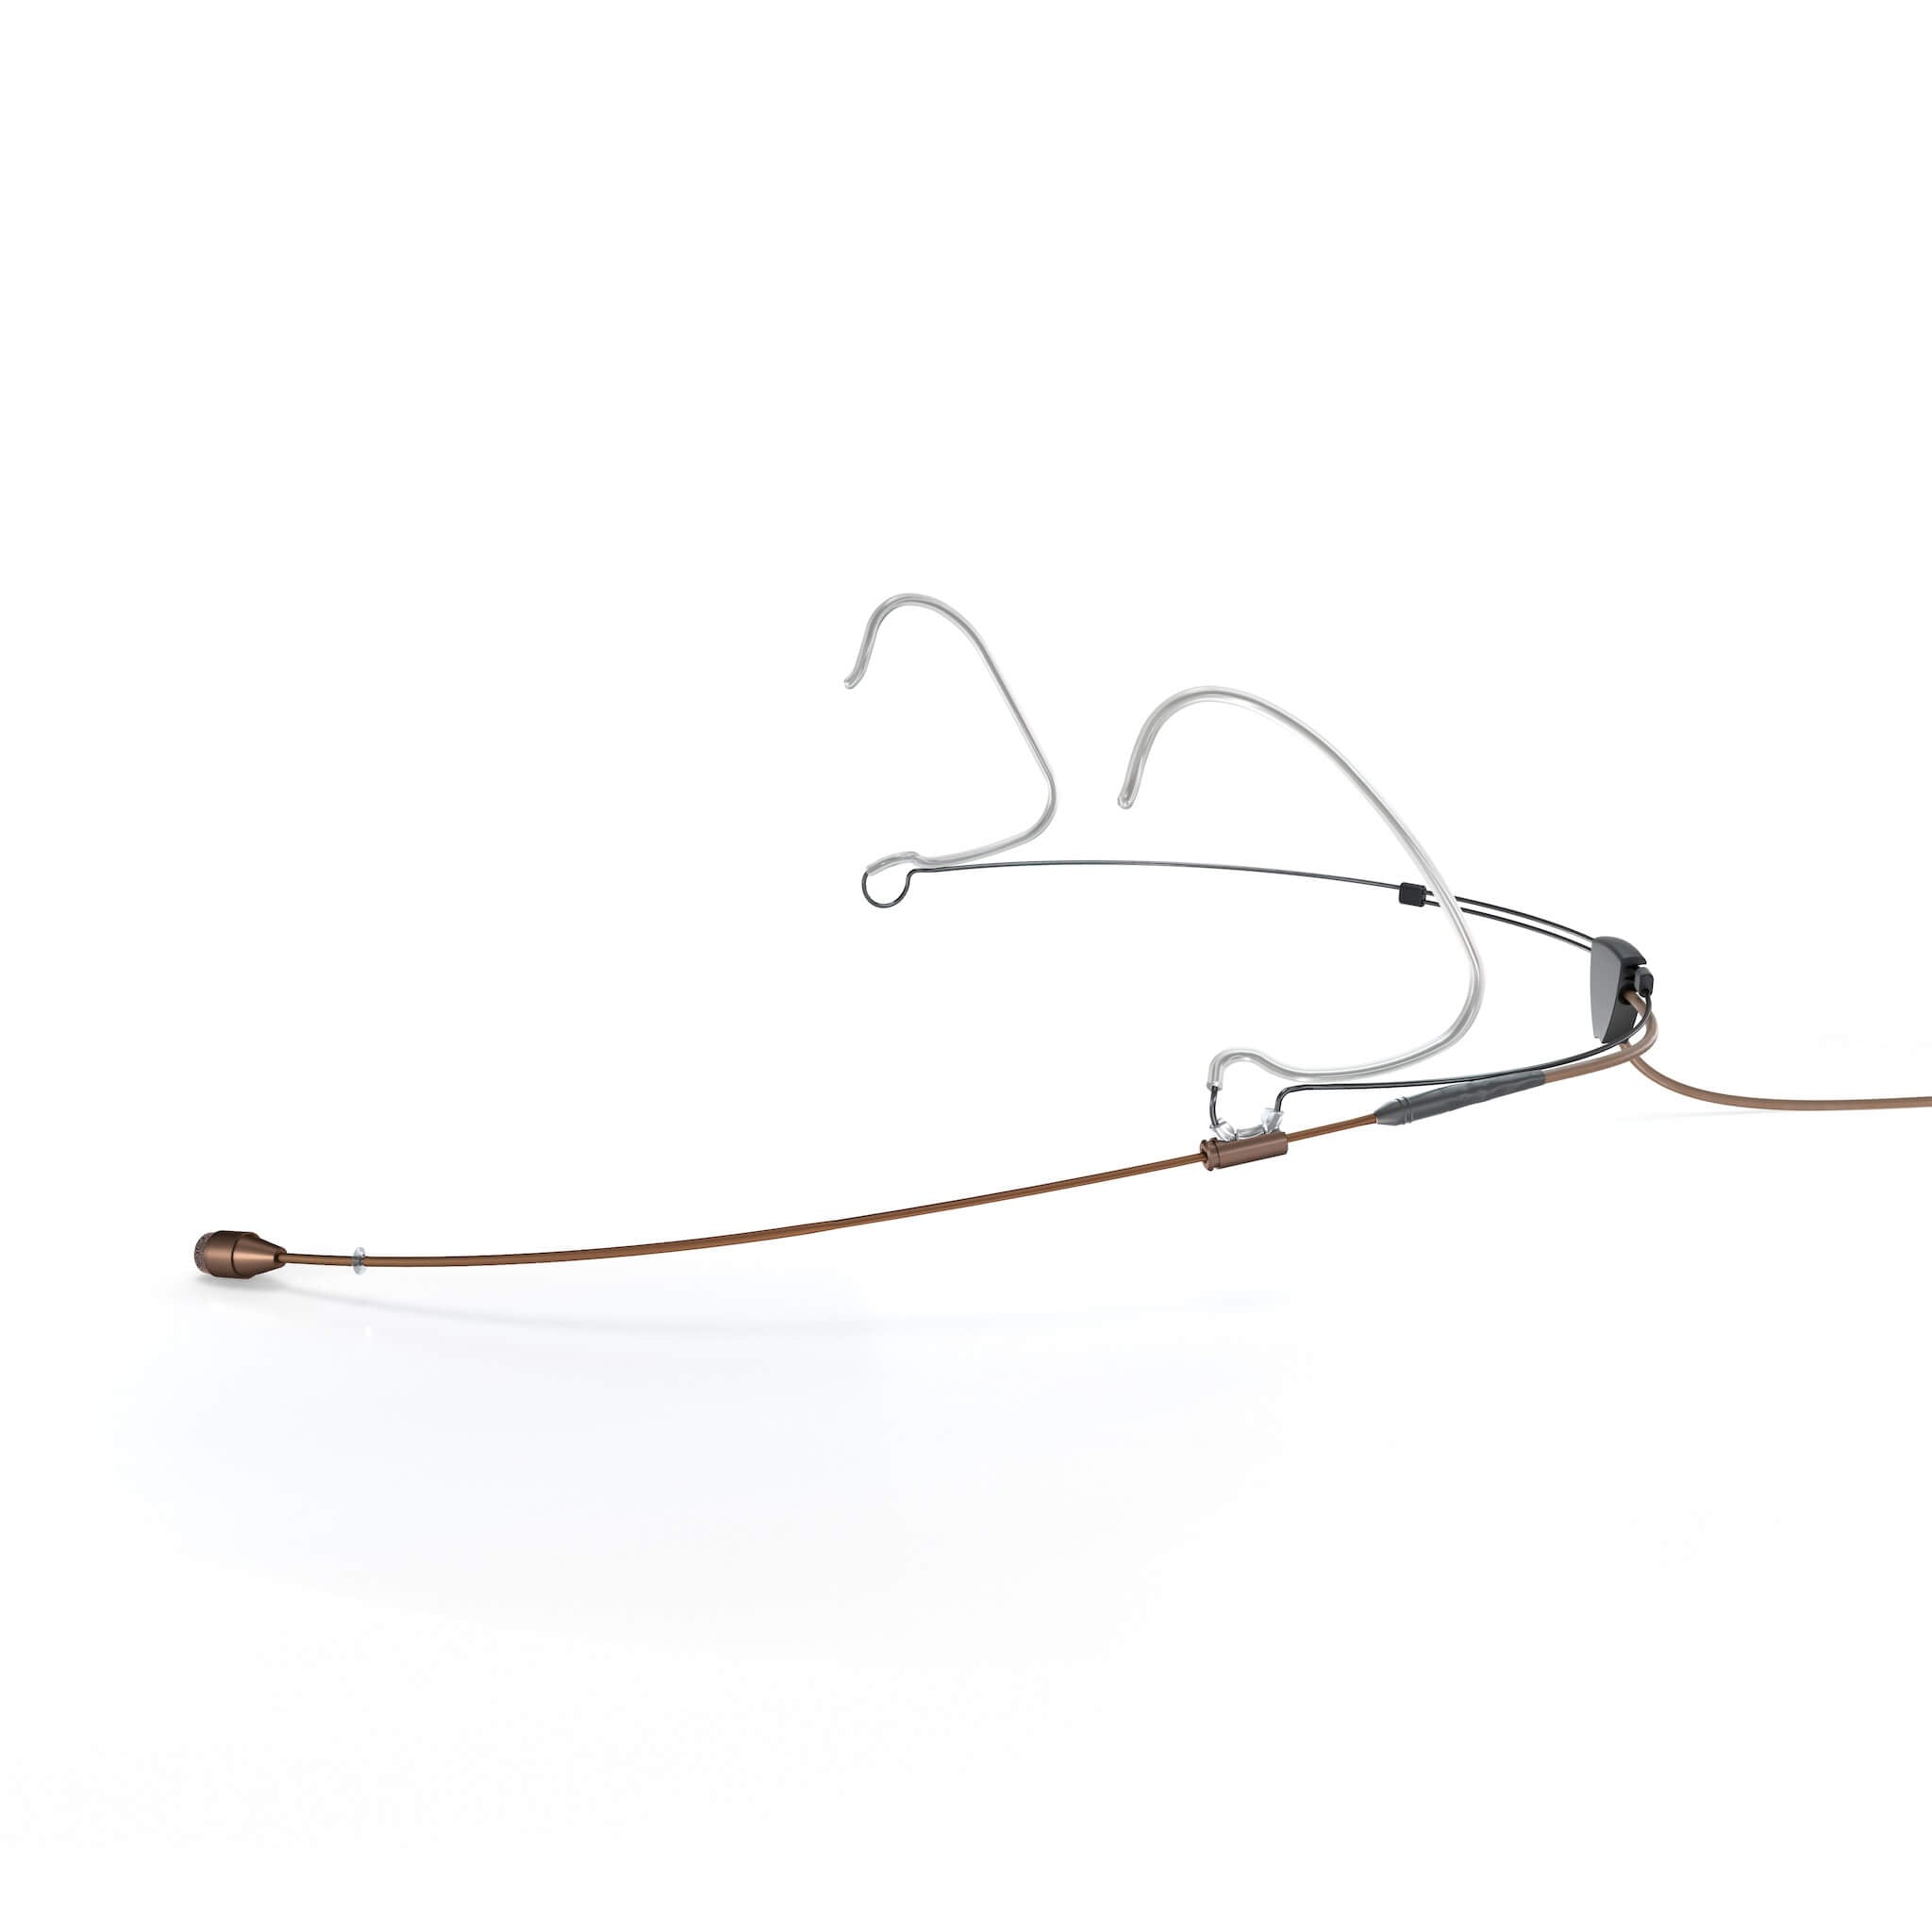 DPA 4466 CORE Omnidirectional Headset Microphone, brown